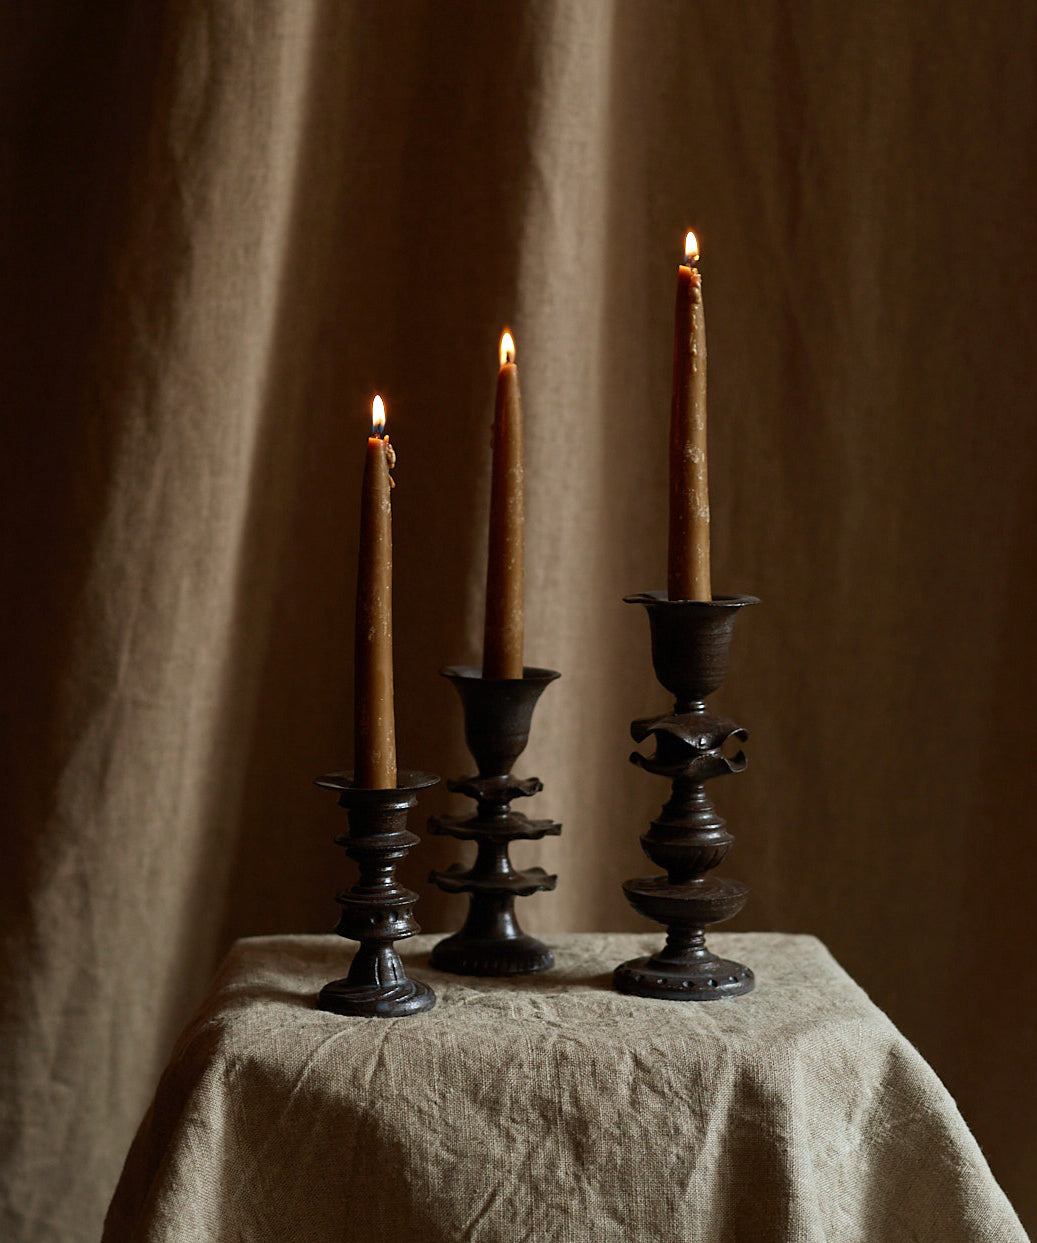 SET OF CANDLESTICKS BY HAN CHIAO